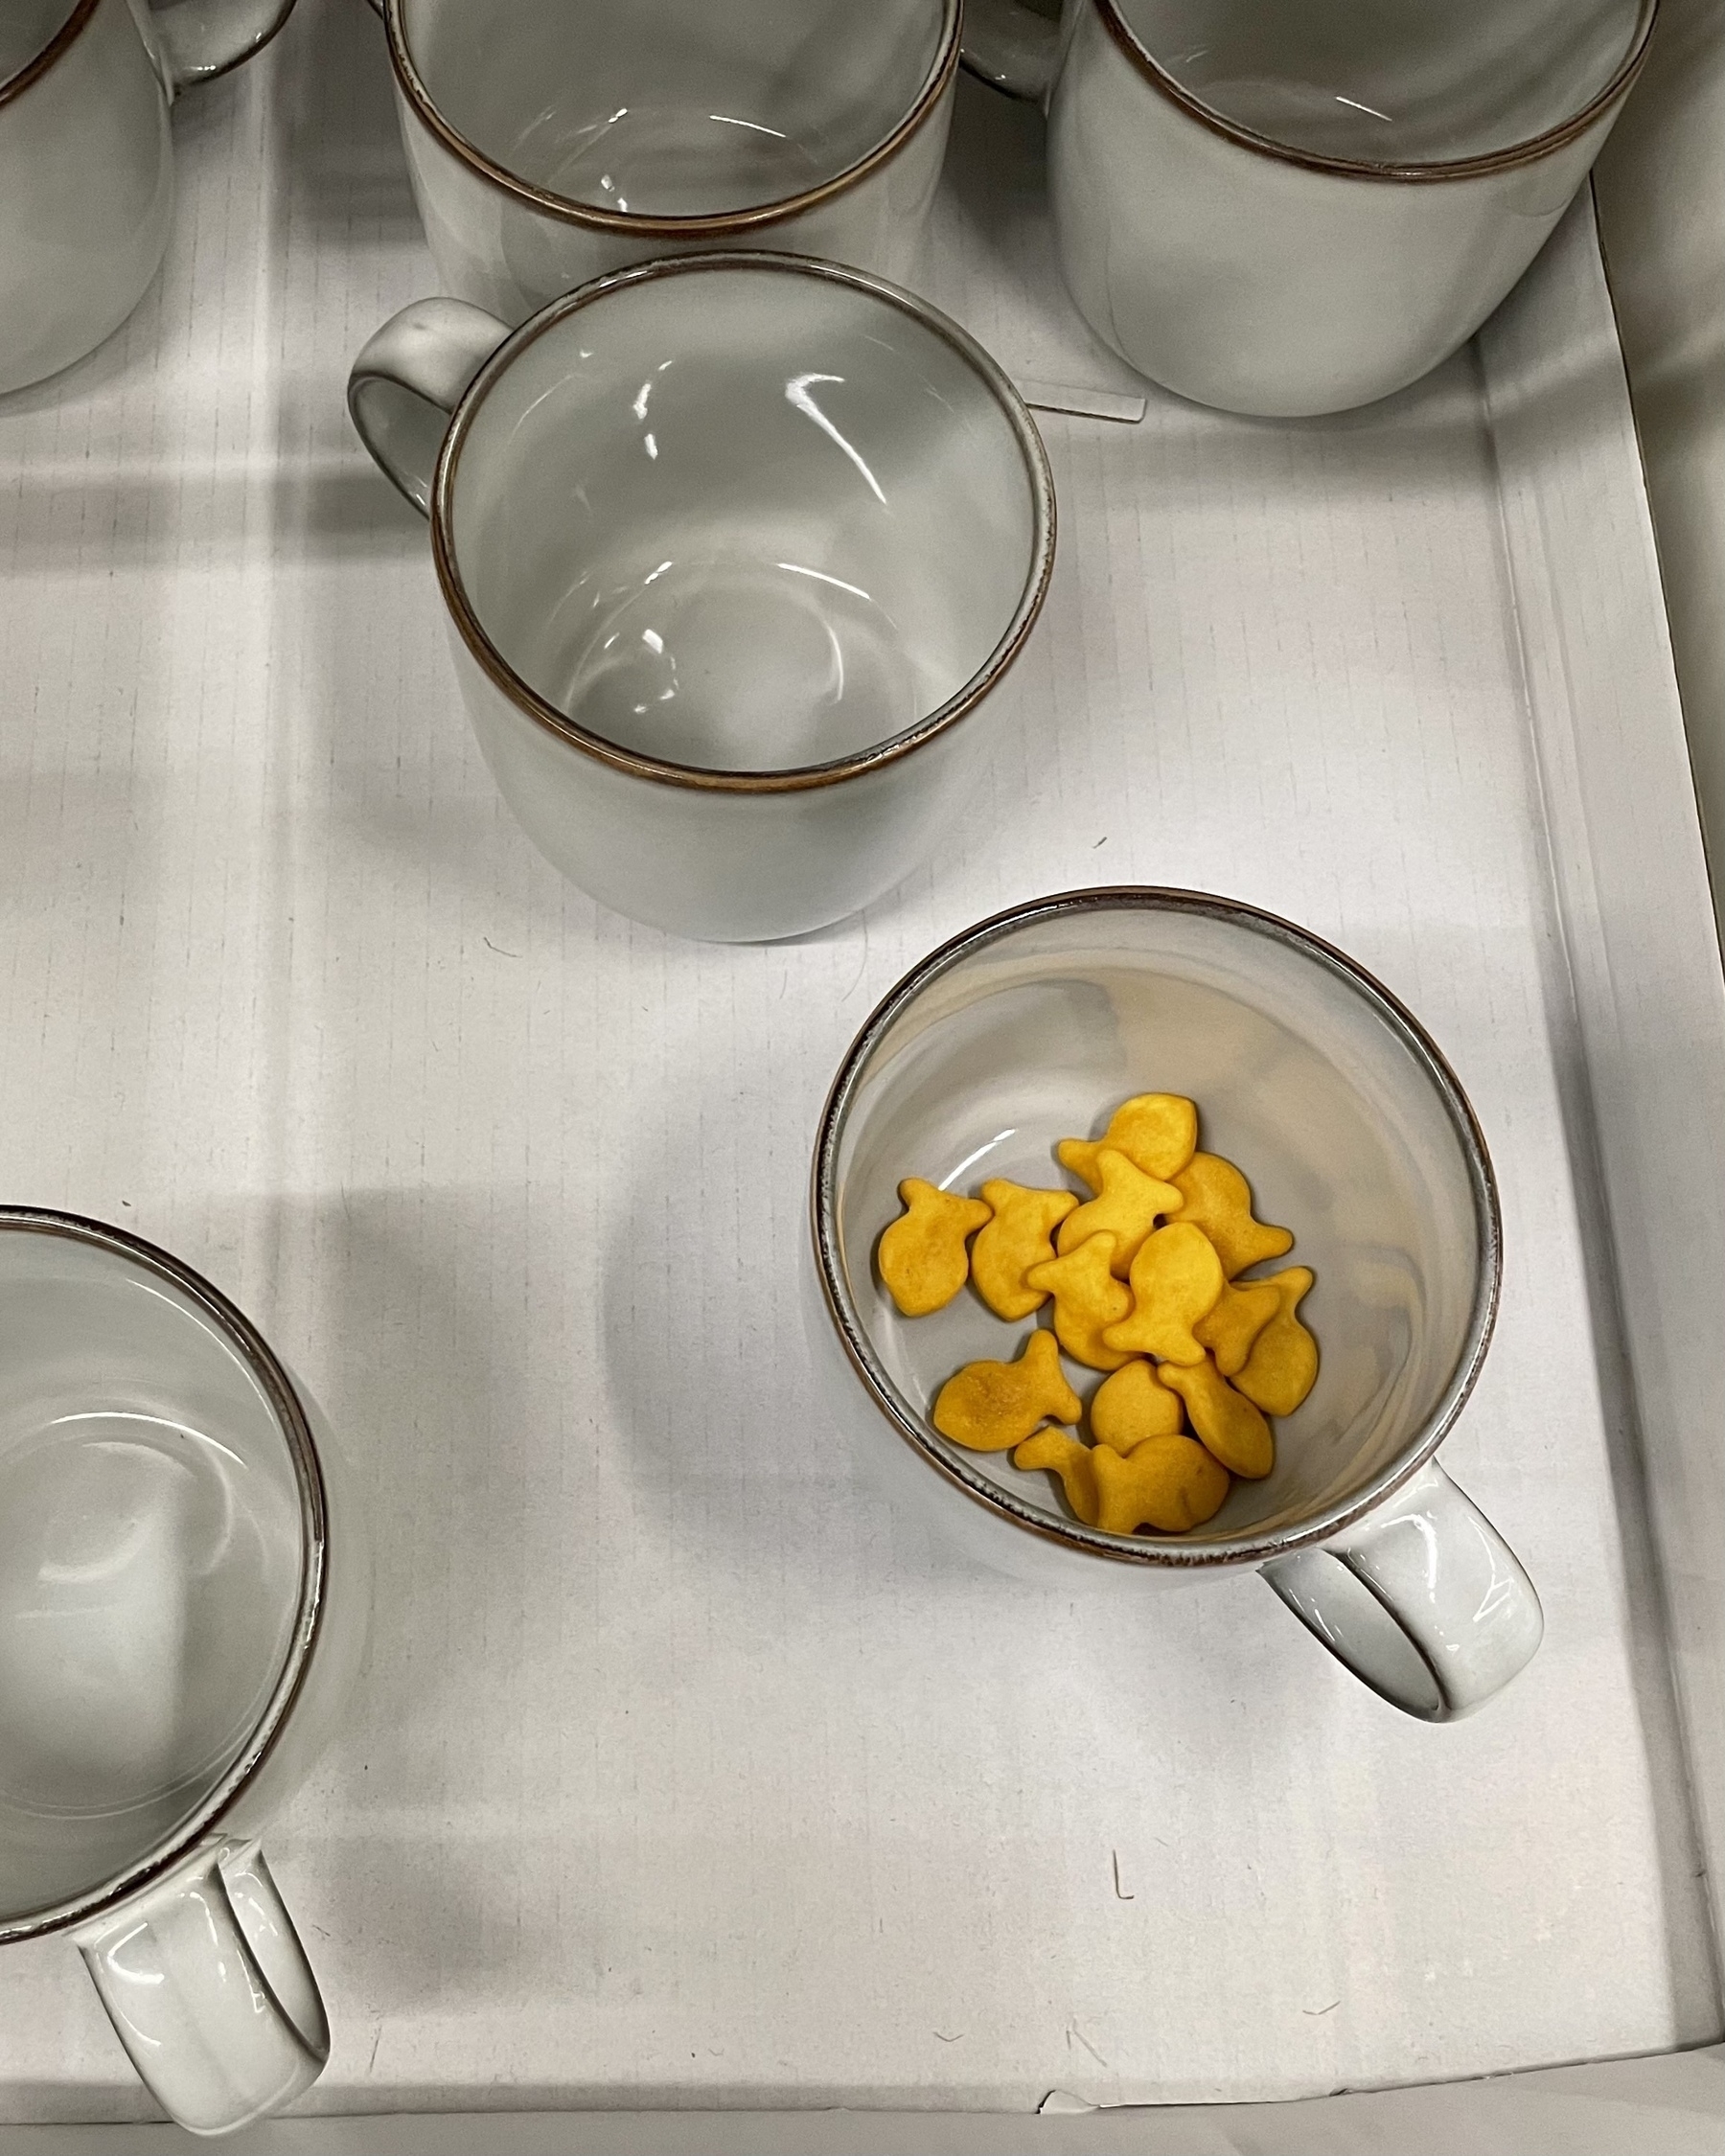 A top-down photo of some mugs on display at IKEA, one of which as a small pile of goldfish crackers in it.